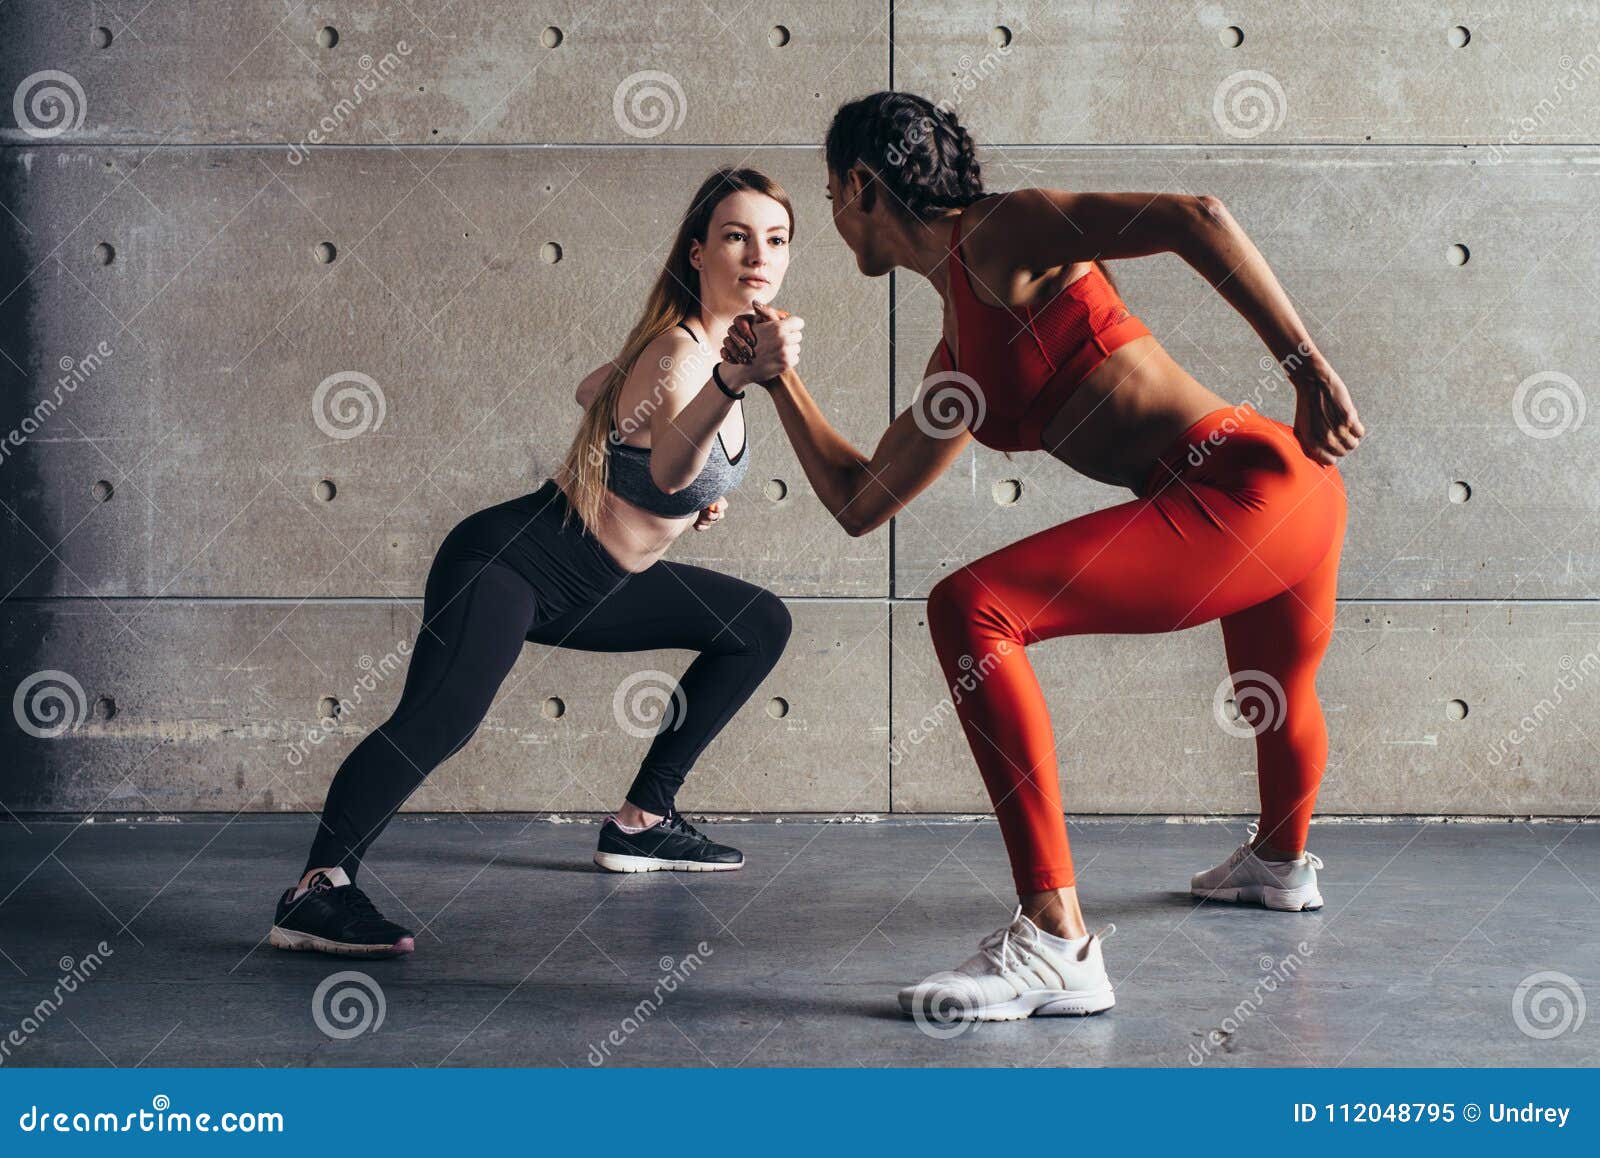 fit woman wrestle on hands with a female opponent looking in her eyes.